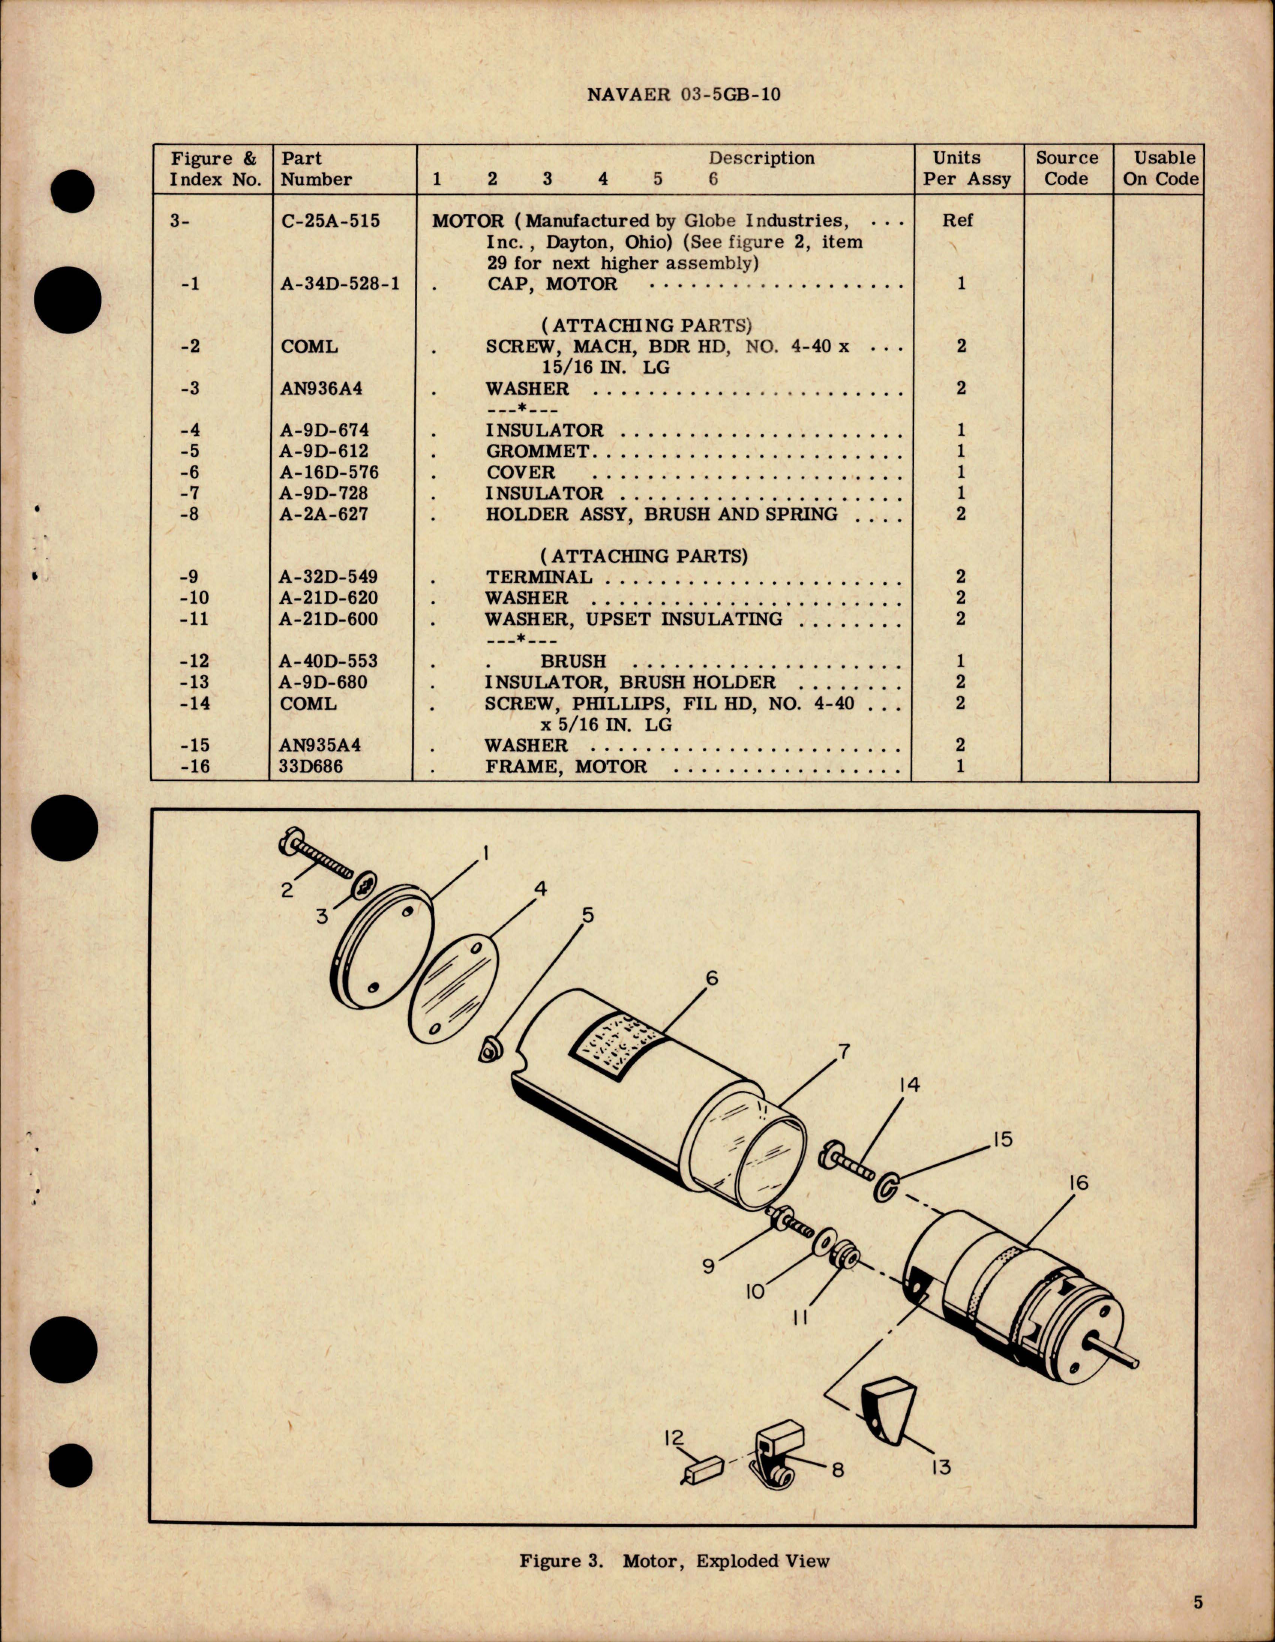 Sample page 5 from AirCorps Library document: Overhaul Instructions with Parts for Navigational Rotating Warning Light